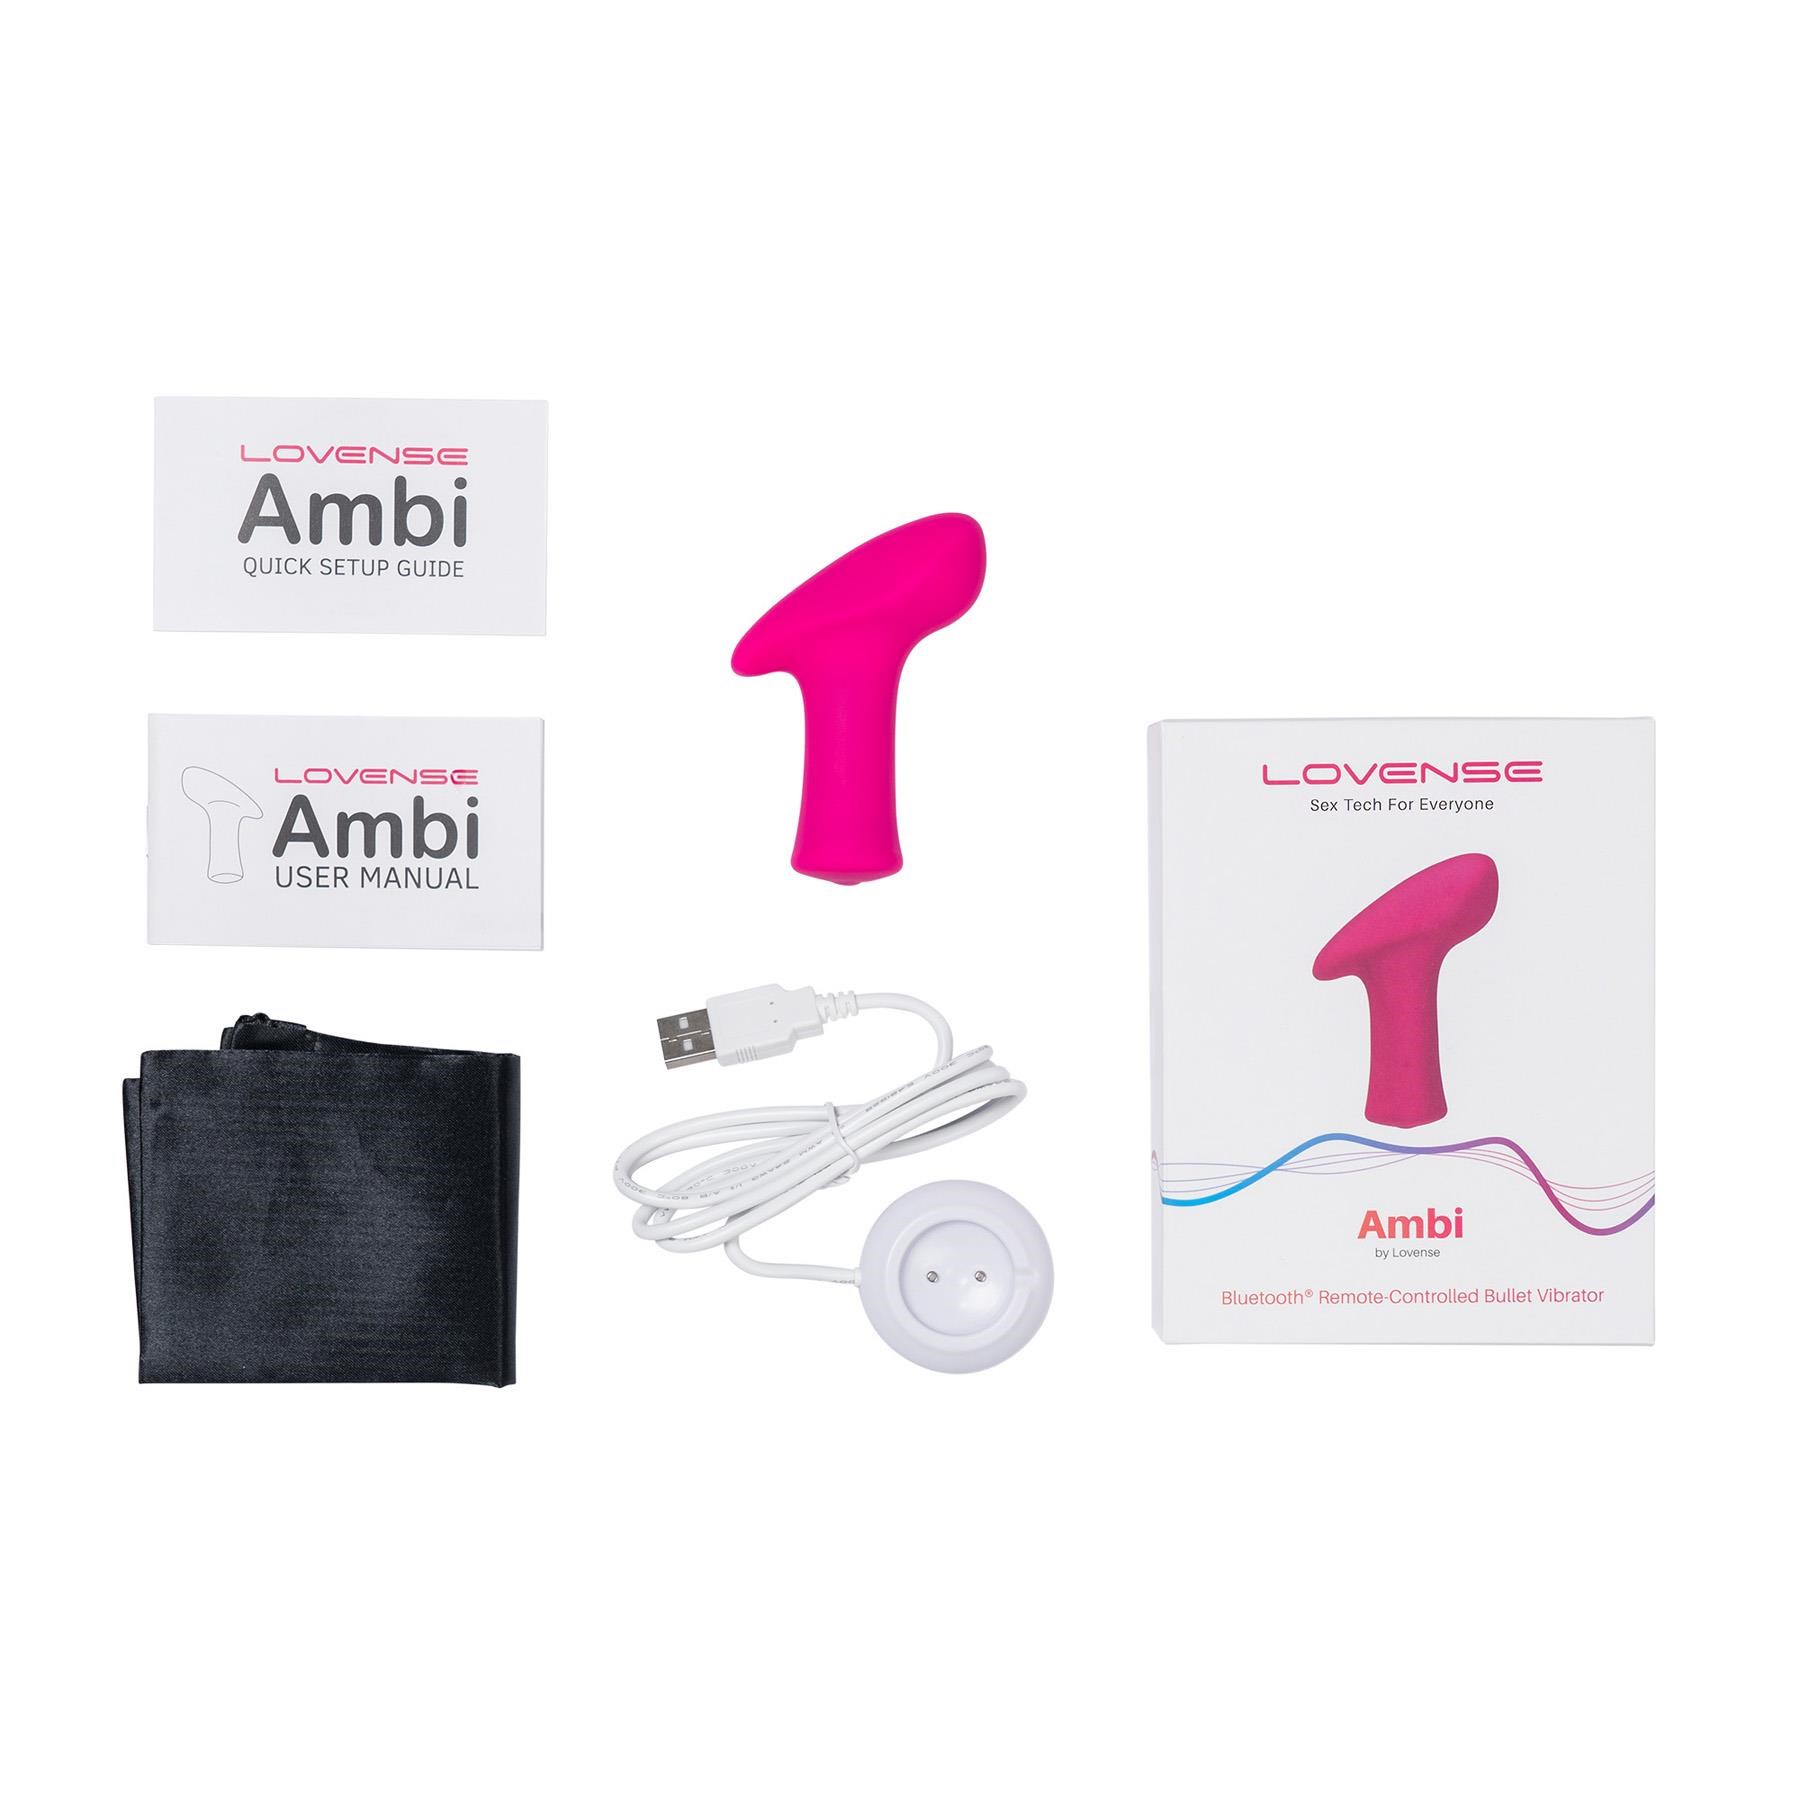 Lovense Bluetooth Ambi Bullet Vibrator - All Components in the Box